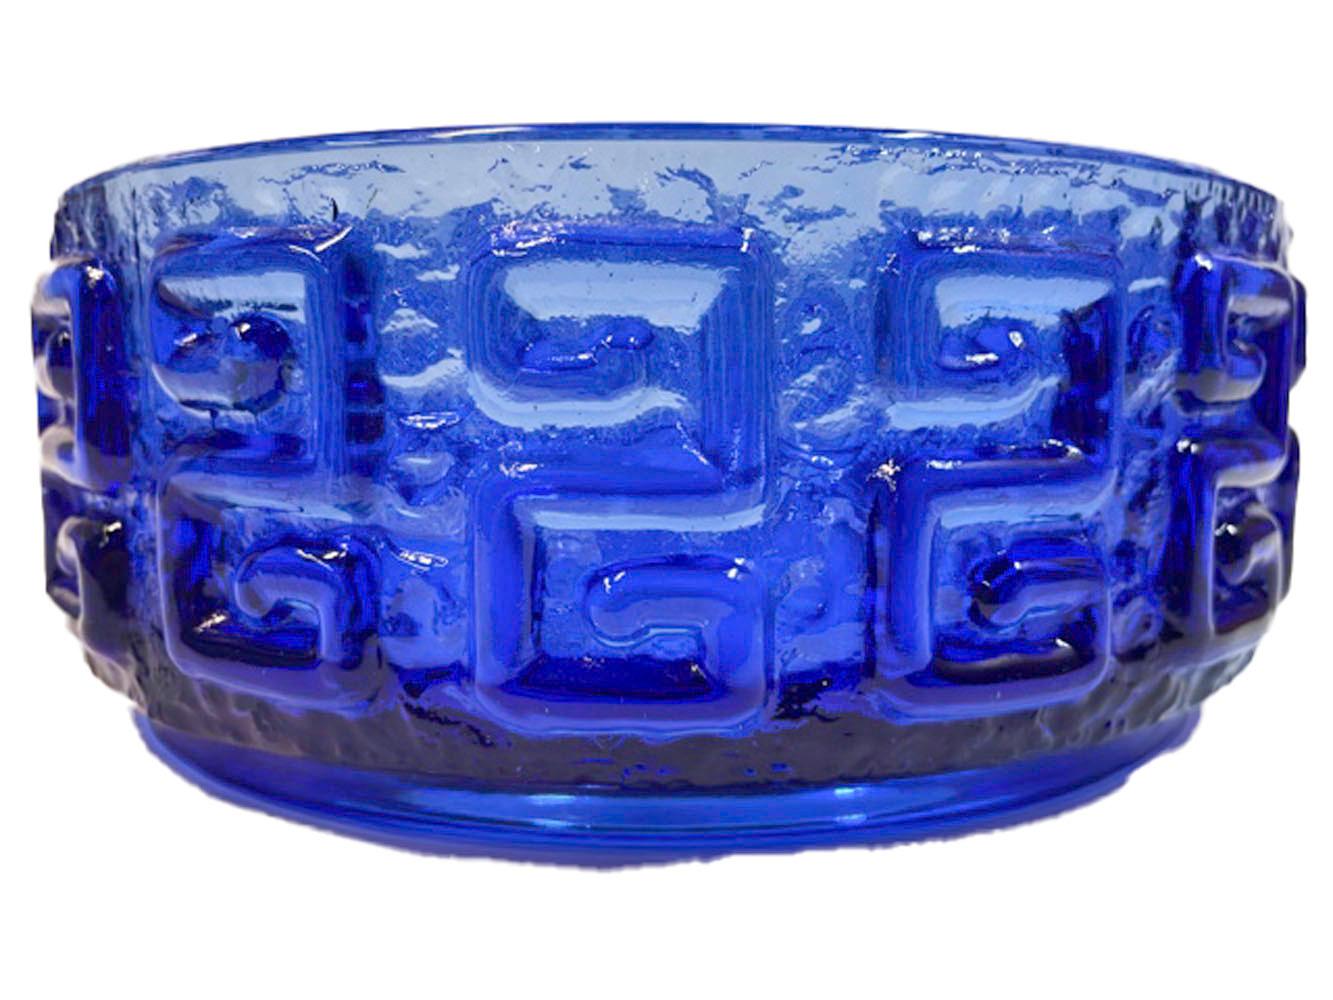 Vintage Scandinavian glass center bowl in kingfisher blue, the pebble textures exterior with raised Greek Key motif.